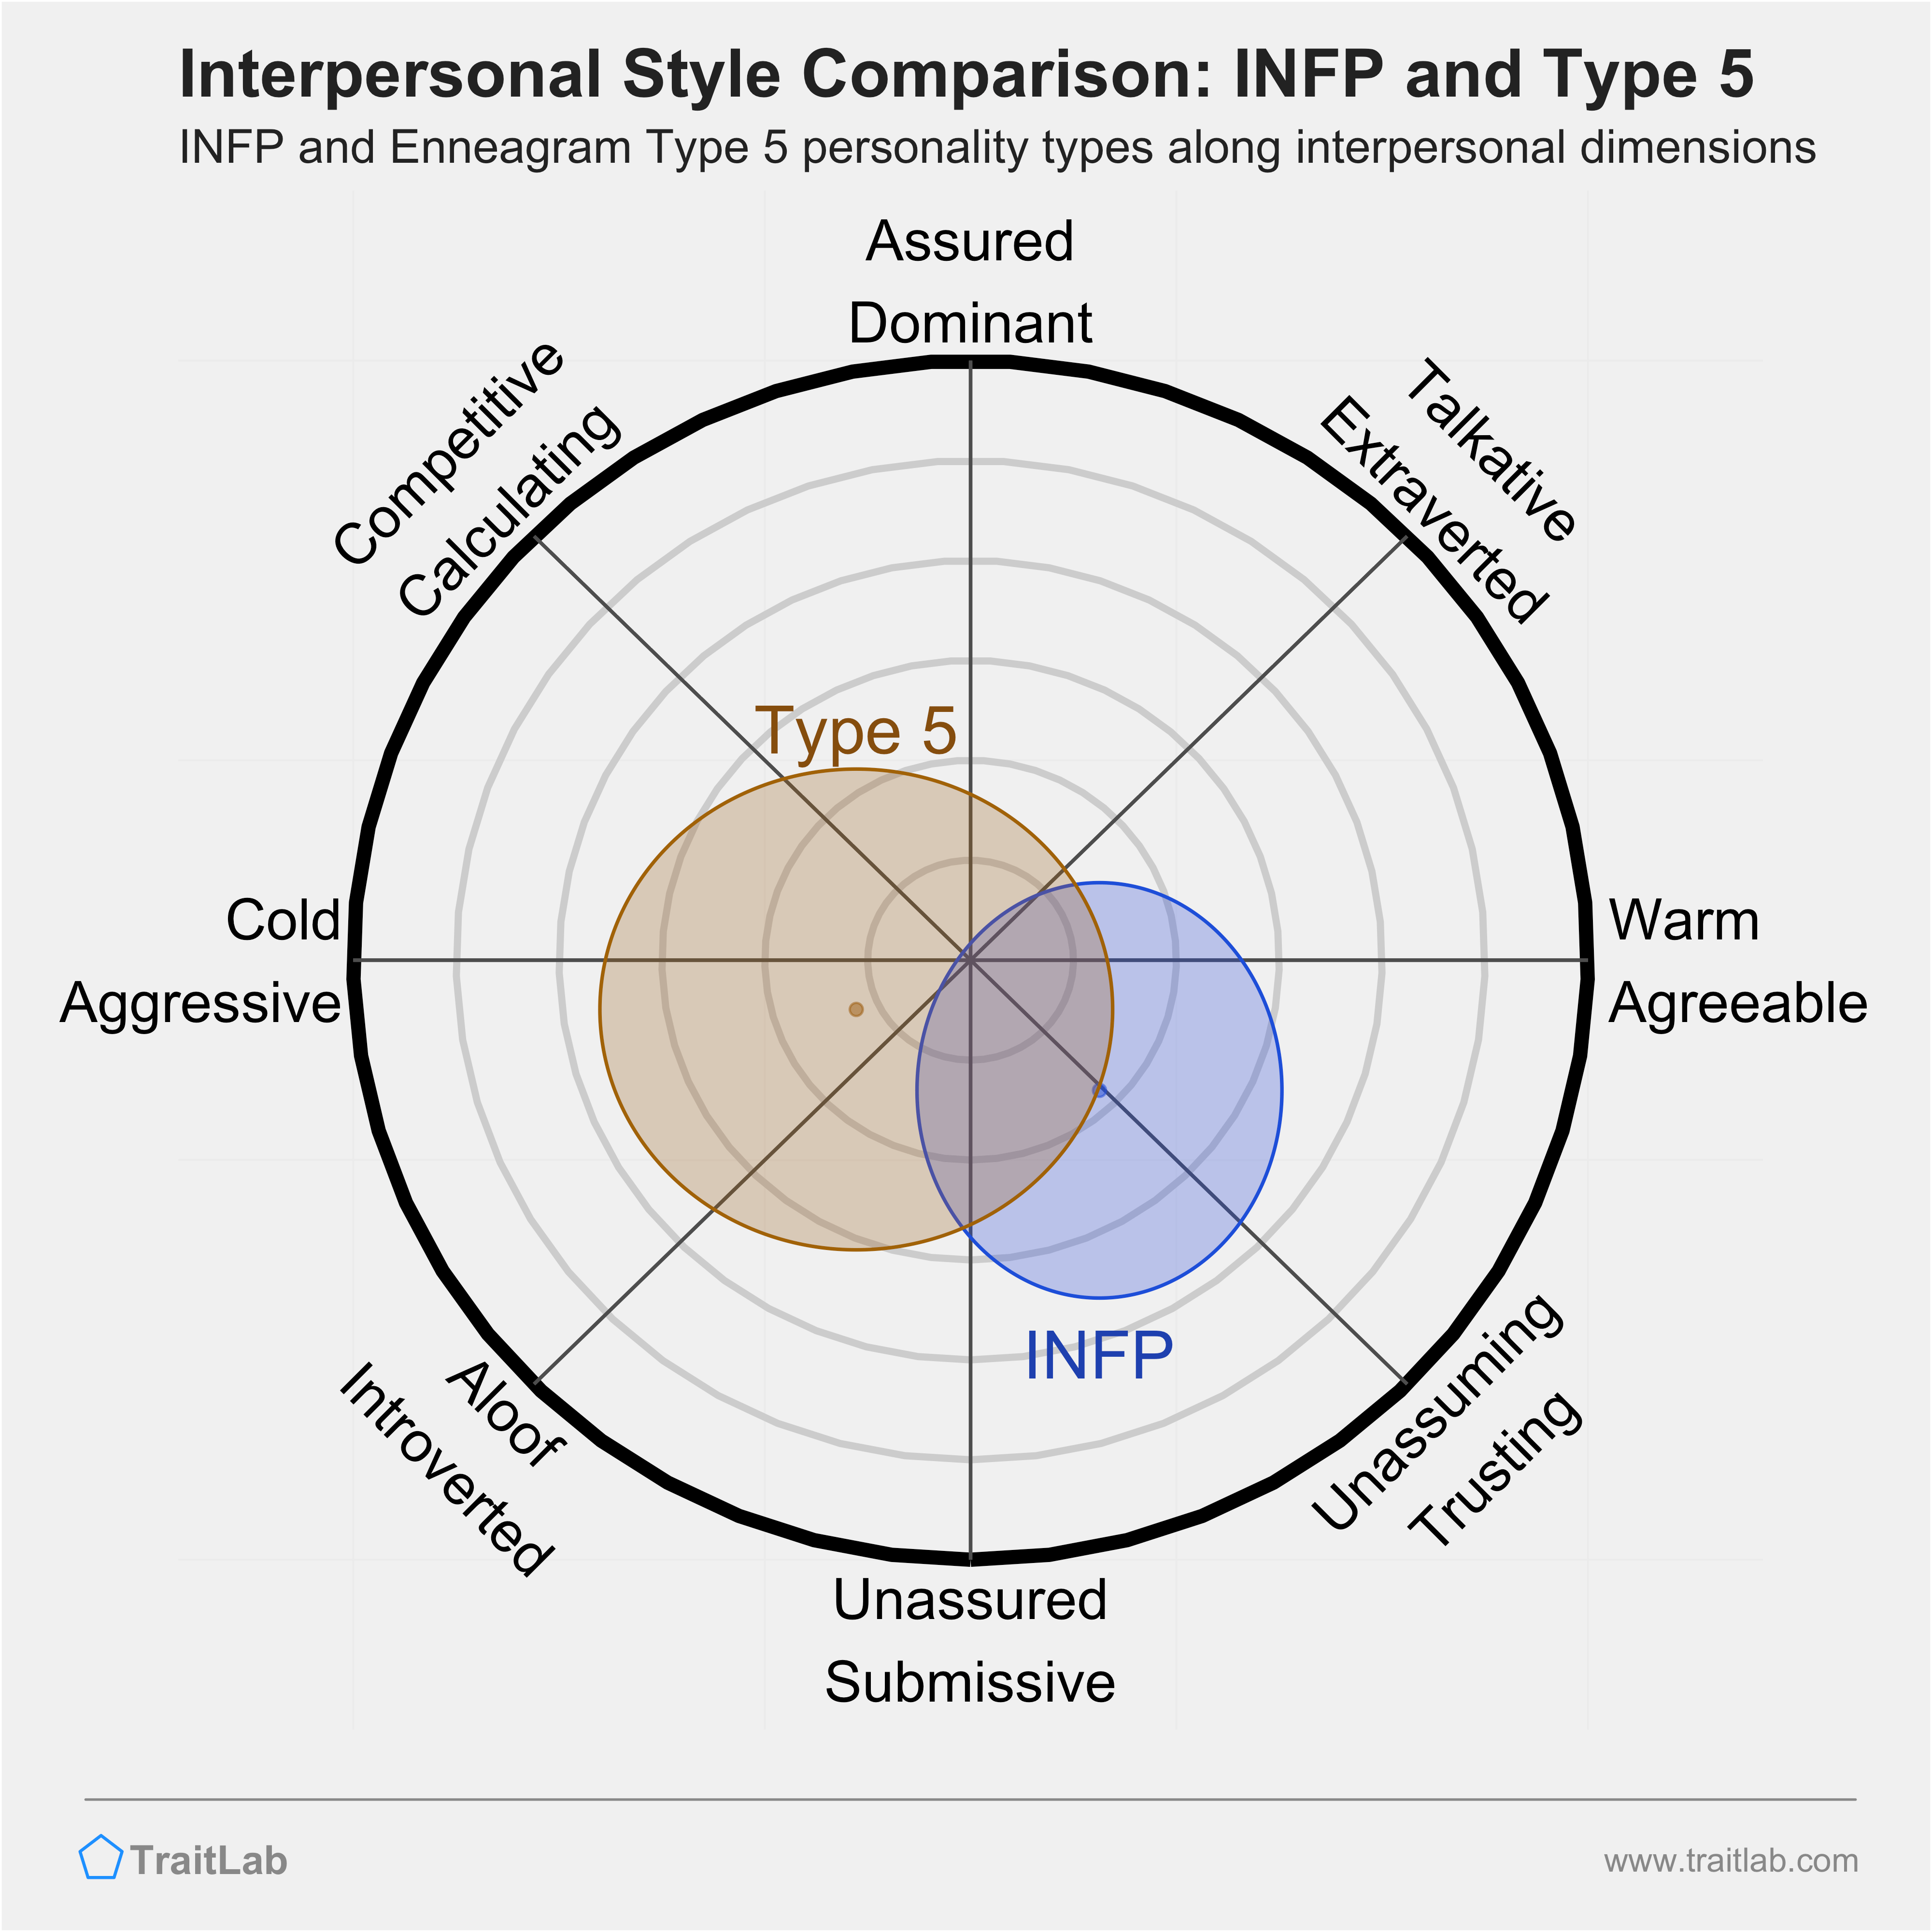 Enneagram INFP and Type 5 comparison across interpersonal dimensions